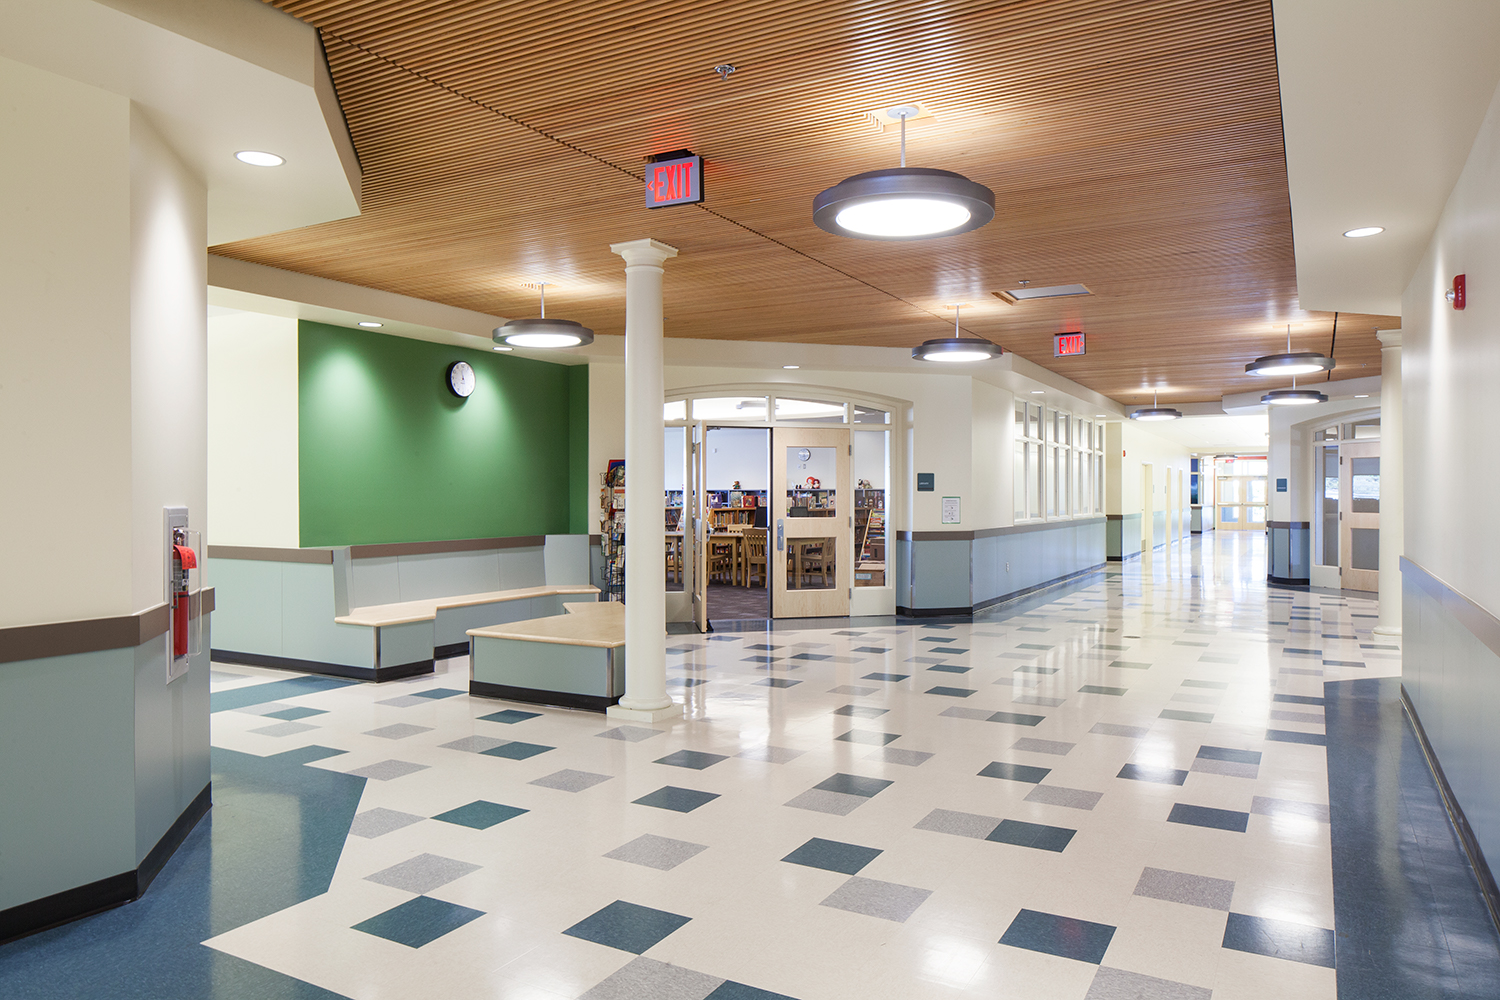 Broadway pendants are good for education lighting, mounted in a school hallway.